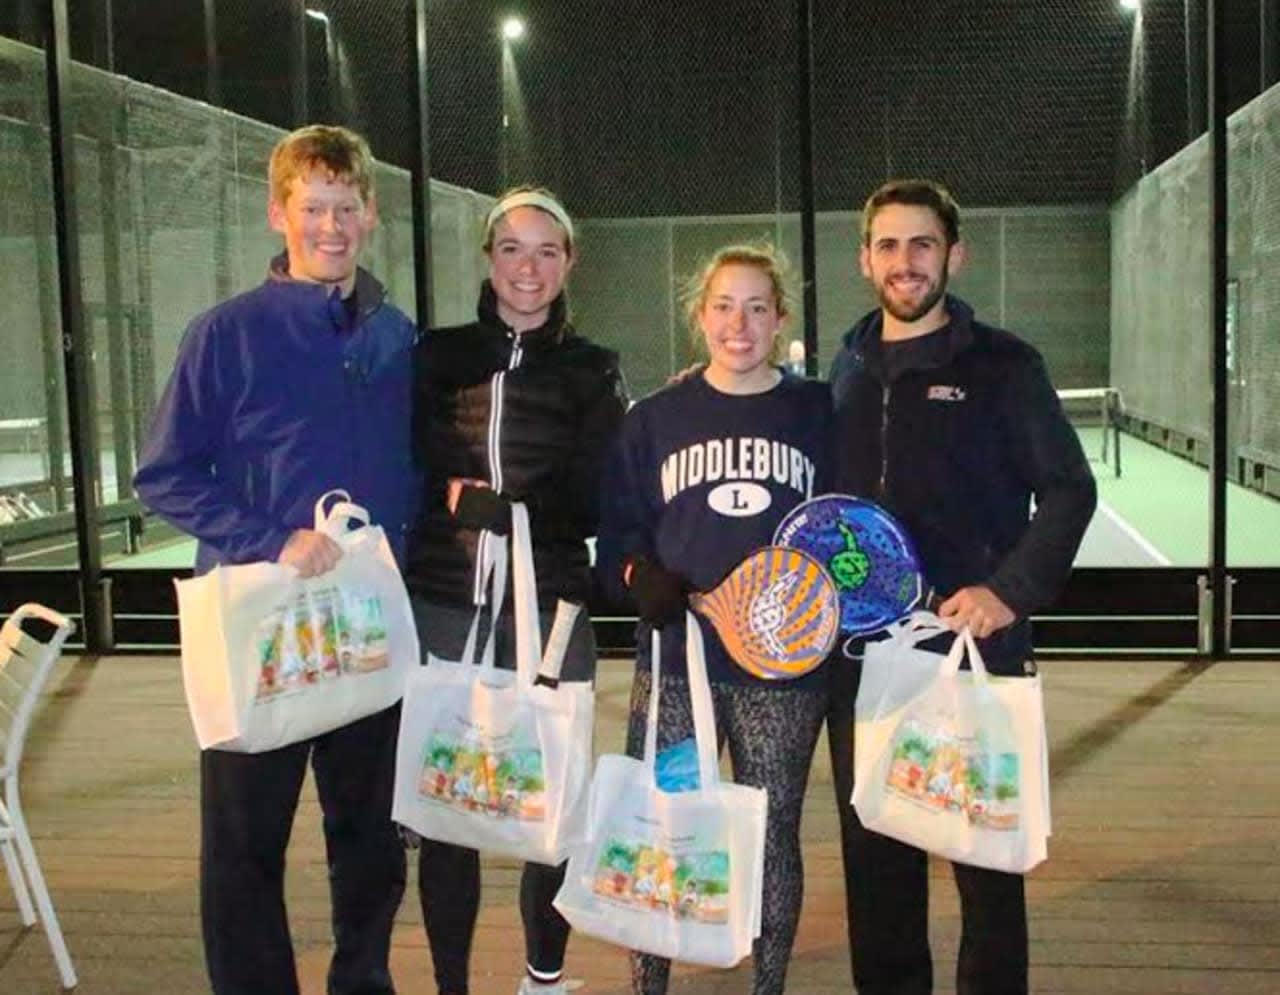 Tournament flight winners Will Oberrender and Brittney Faber with runners up Patrick O'Callaghan and Margaret Souther.